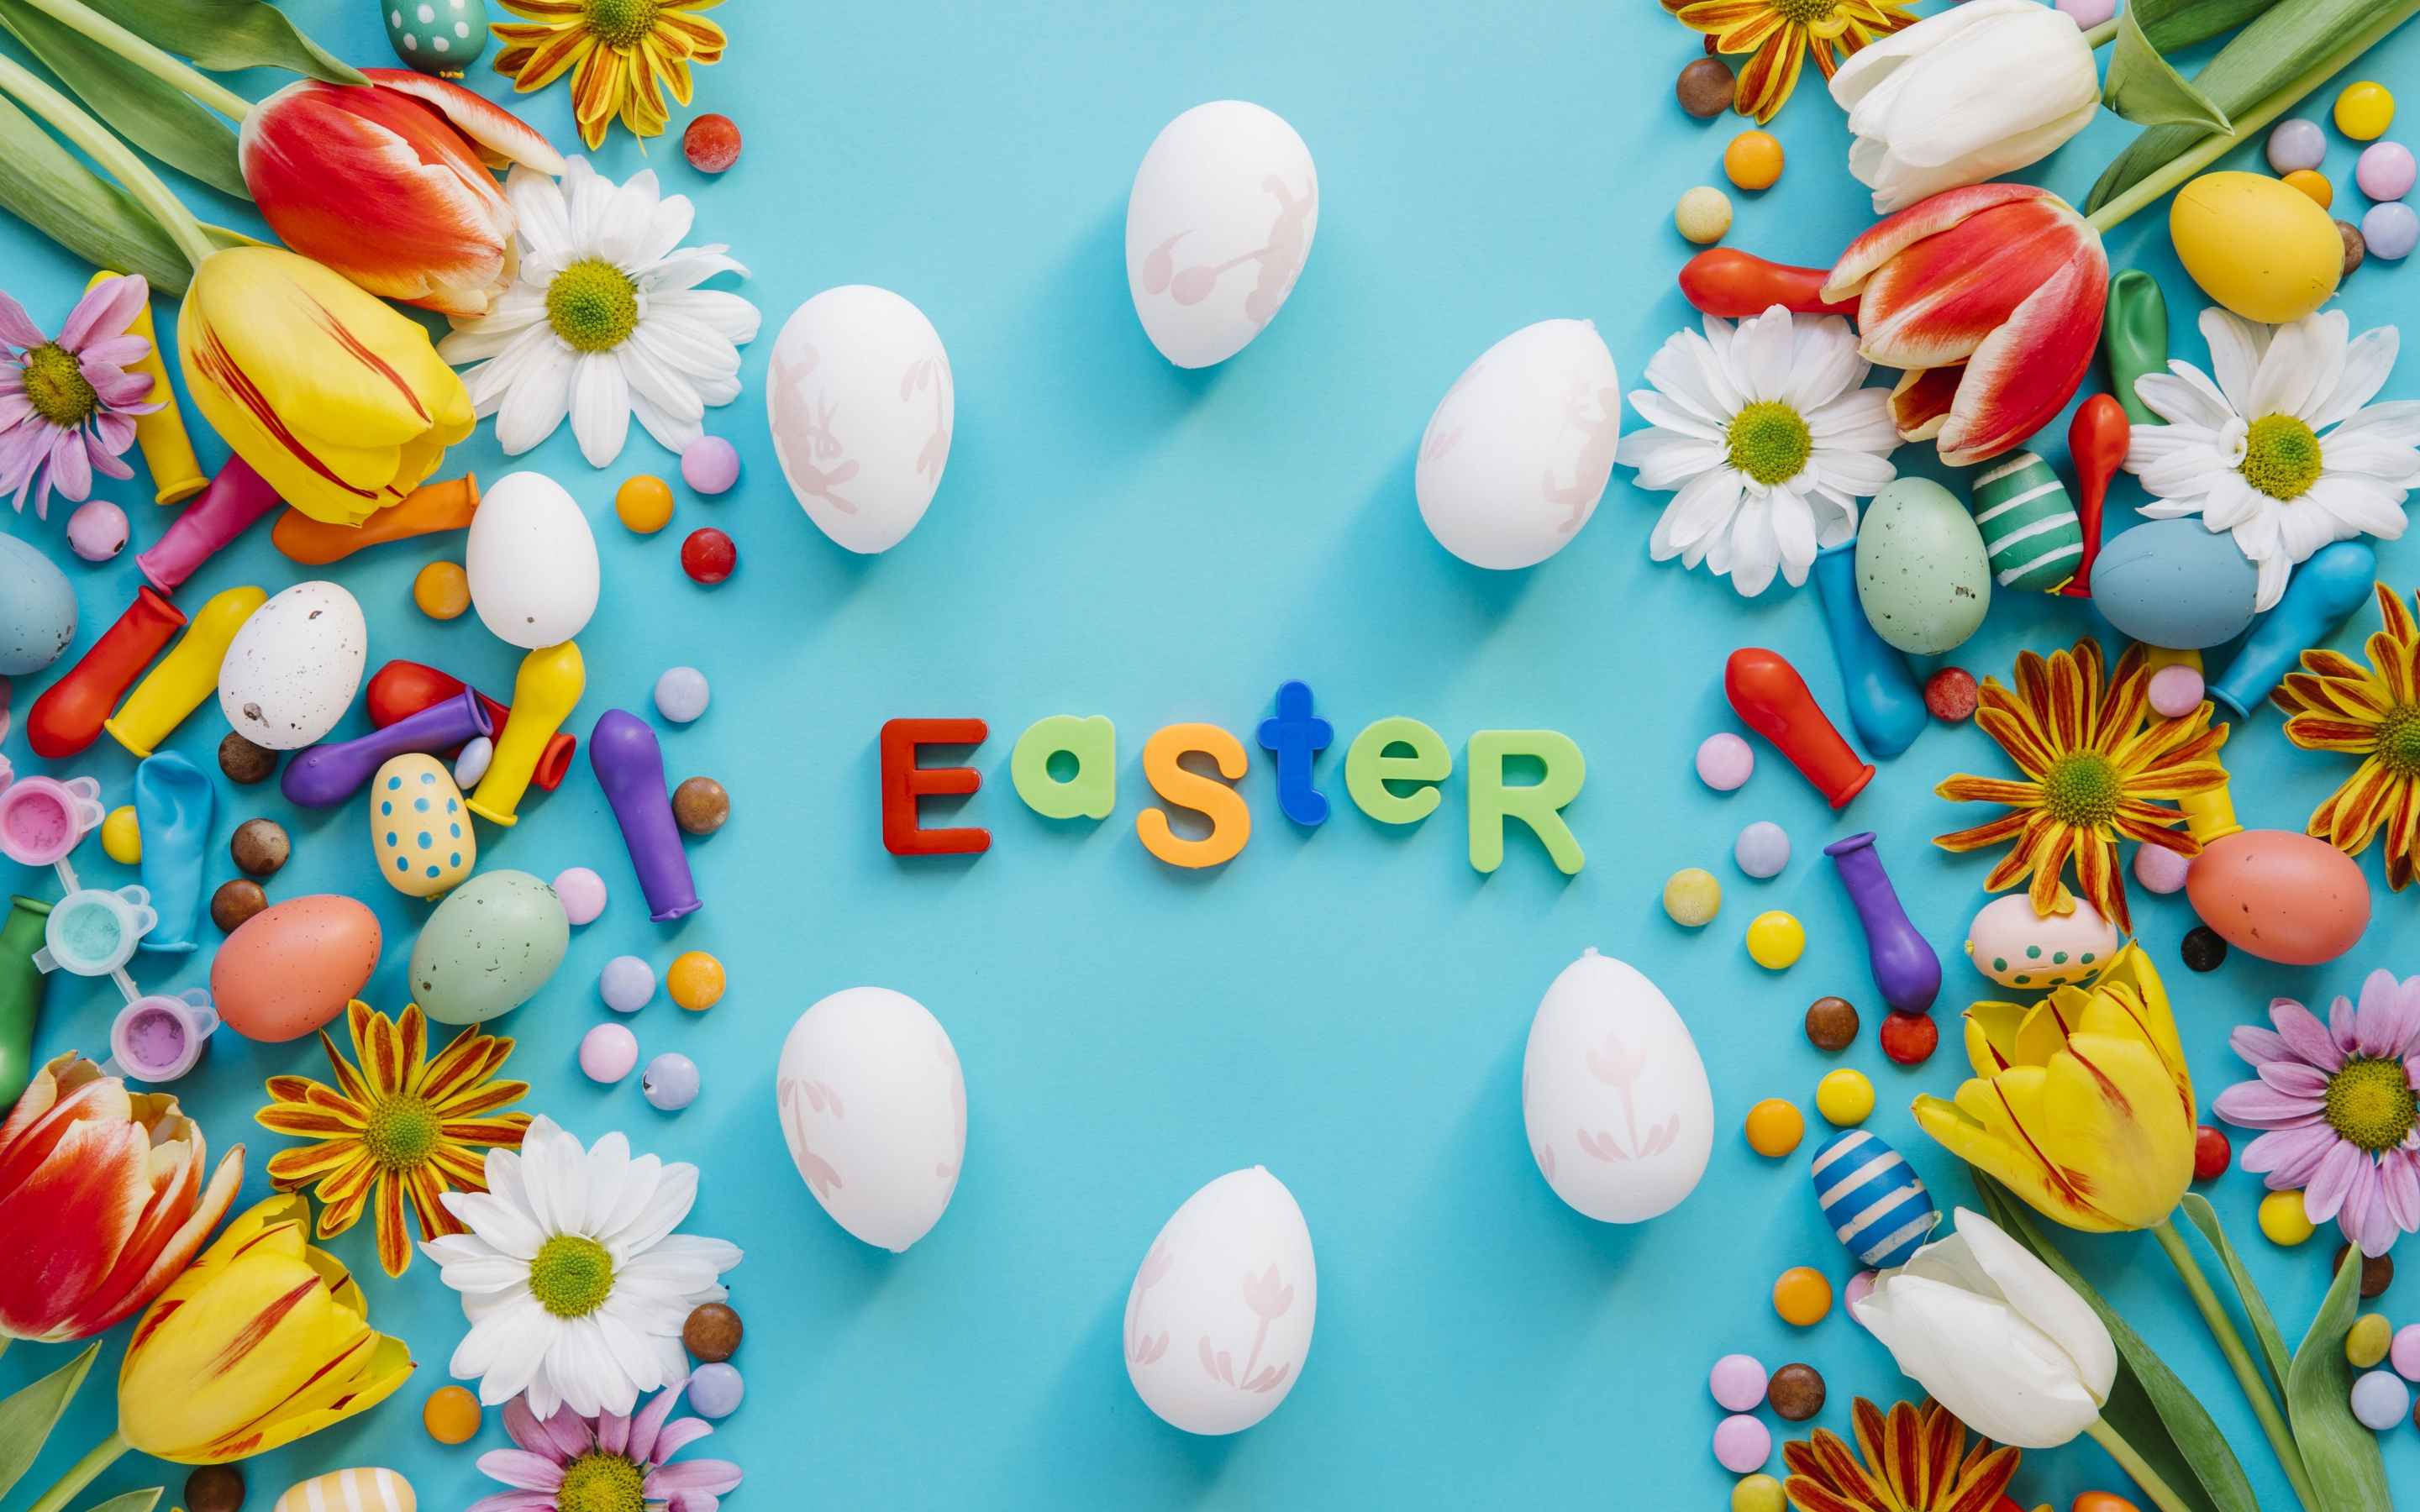 Flowers, eggs, colorful, easter, 2880x1800 wallpaper